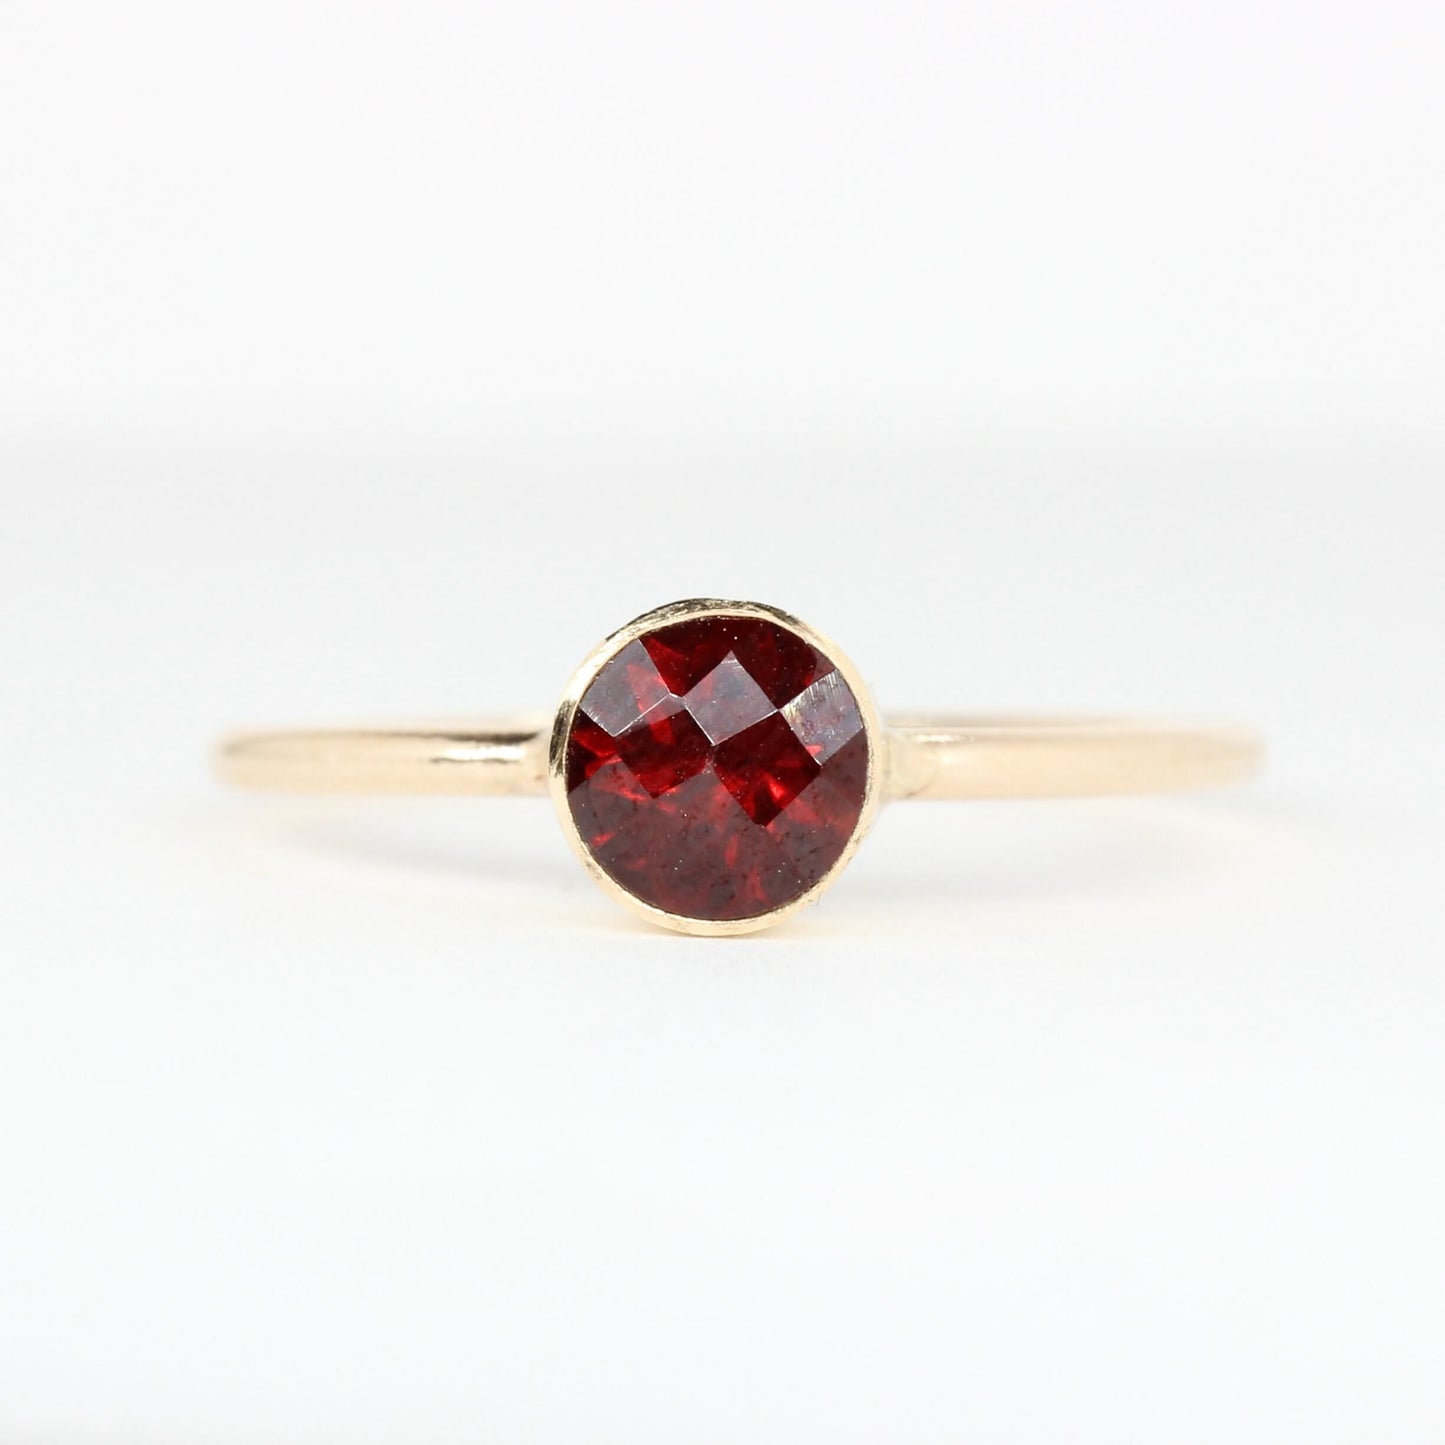 14K Gold Filled Garnet Stacking Ring // 5mm Faceted January Birthstone